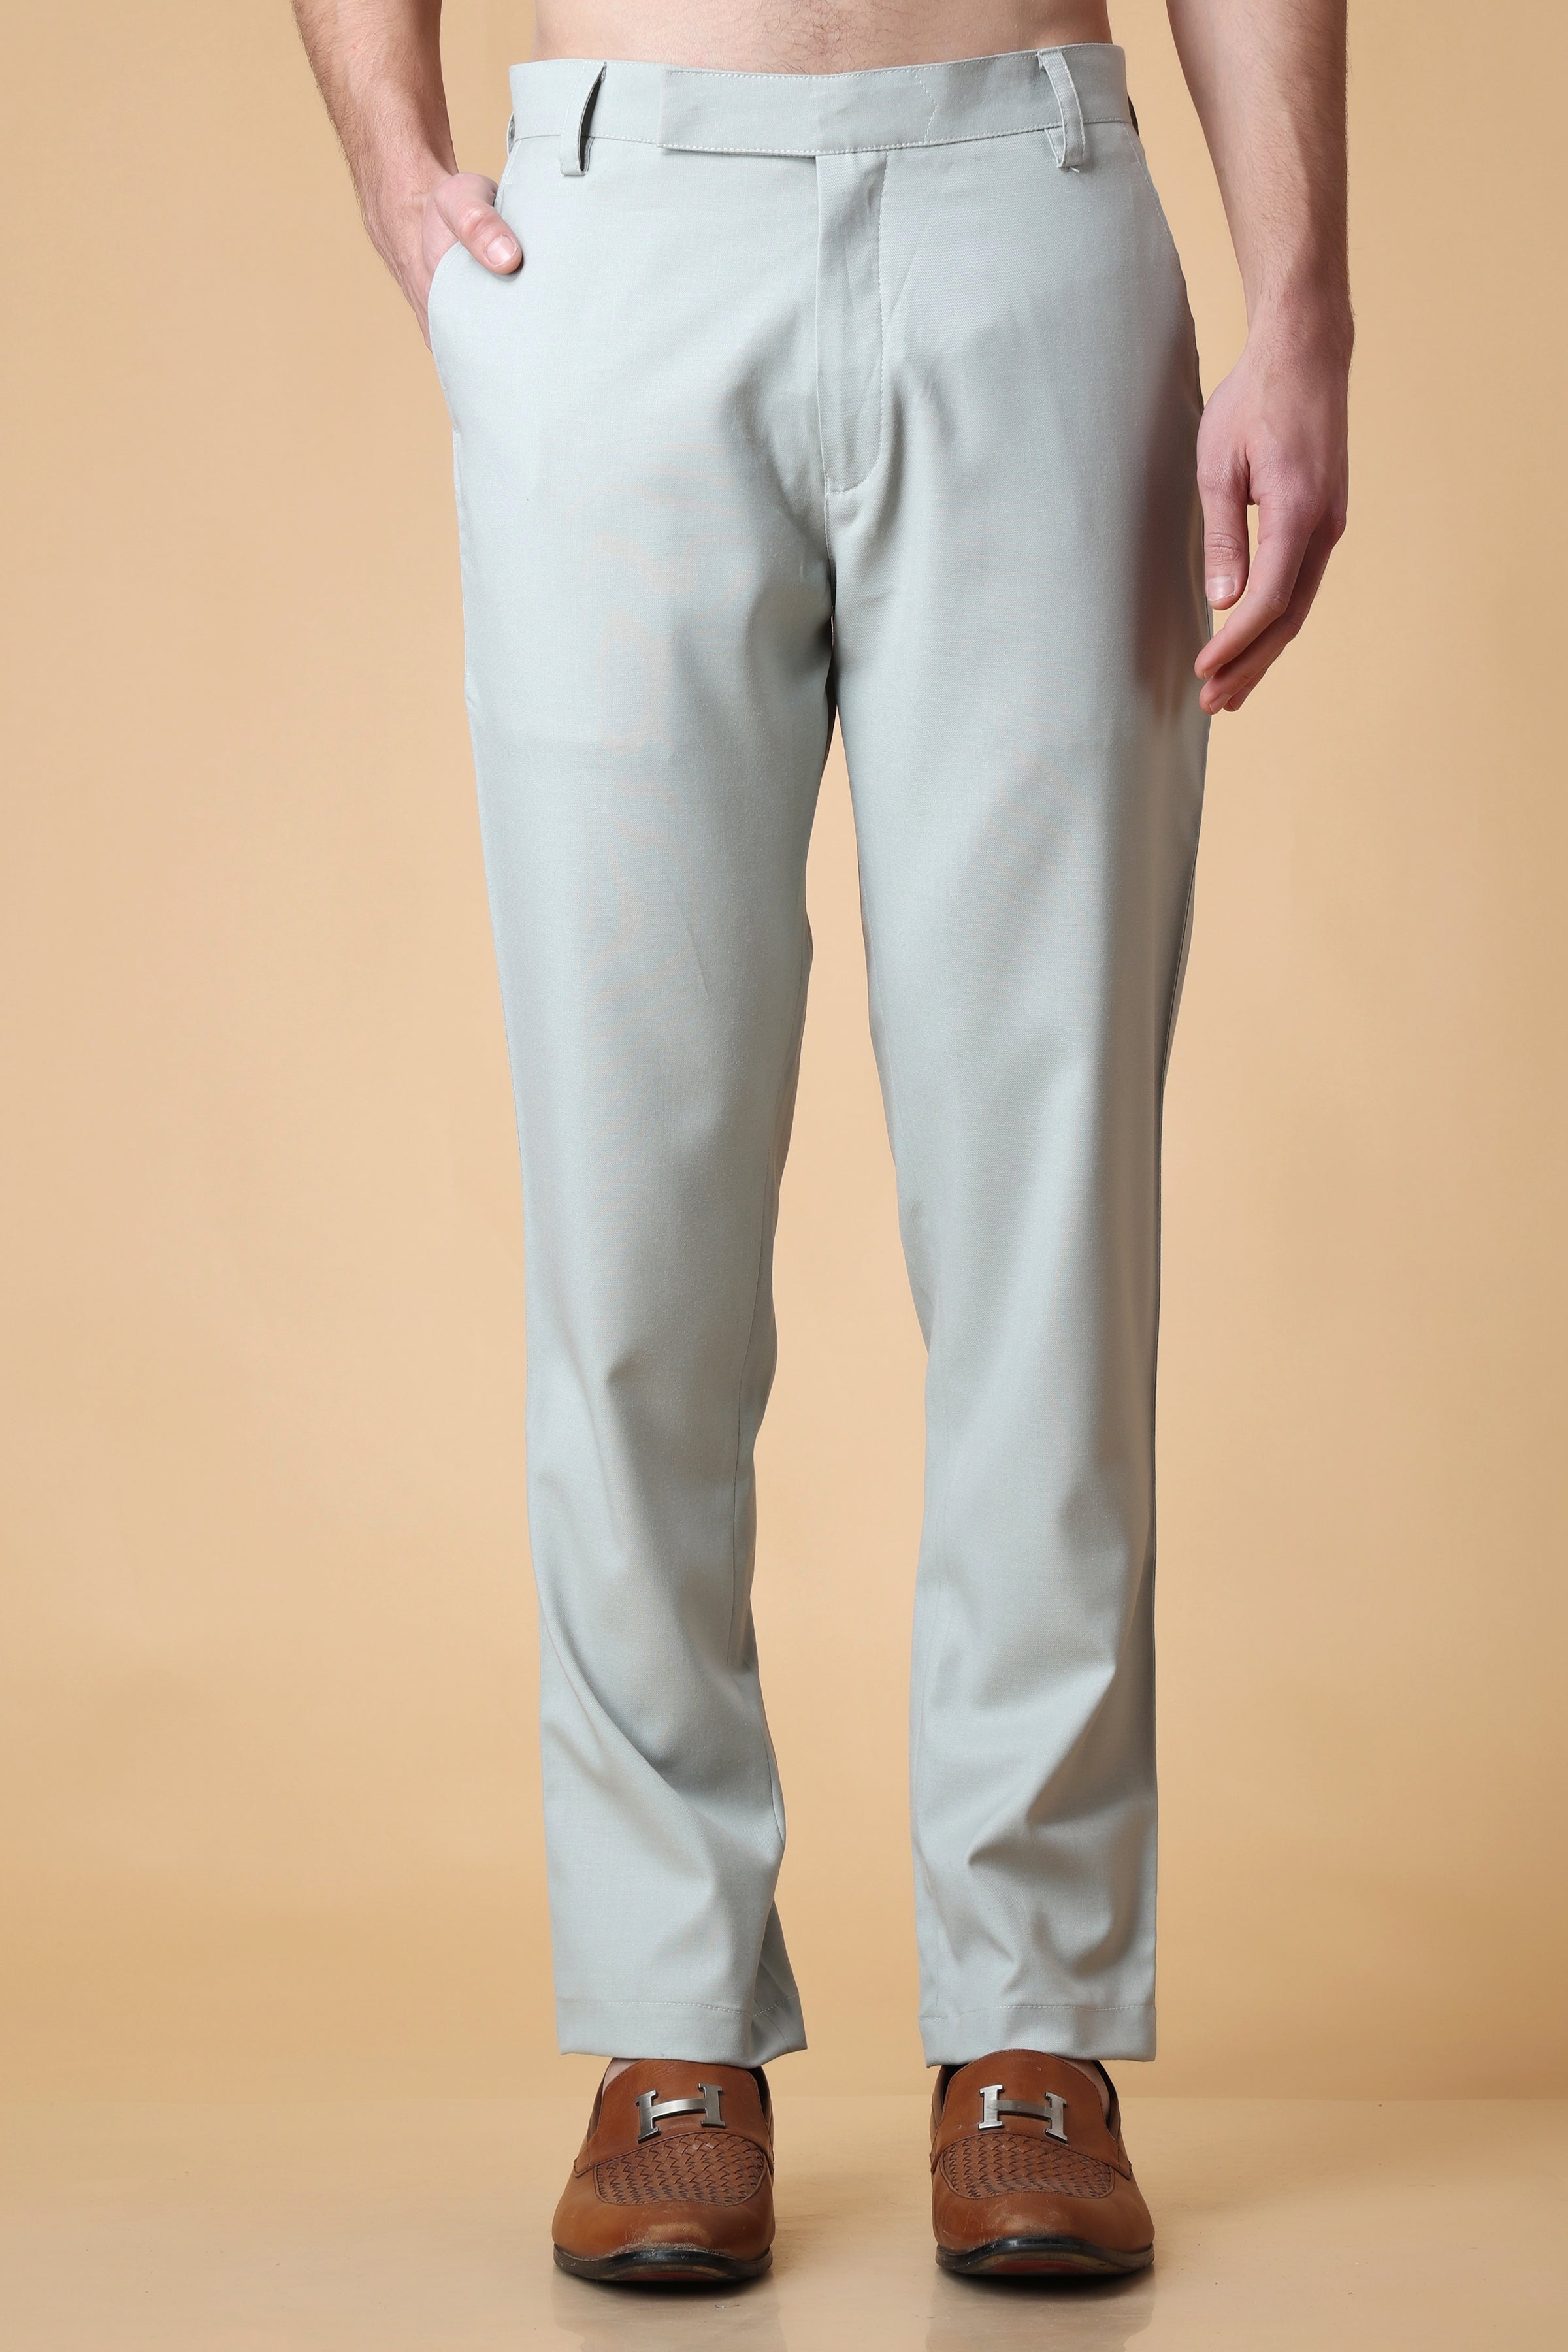 Textured Formal Trousers In Beige B91 Sommer